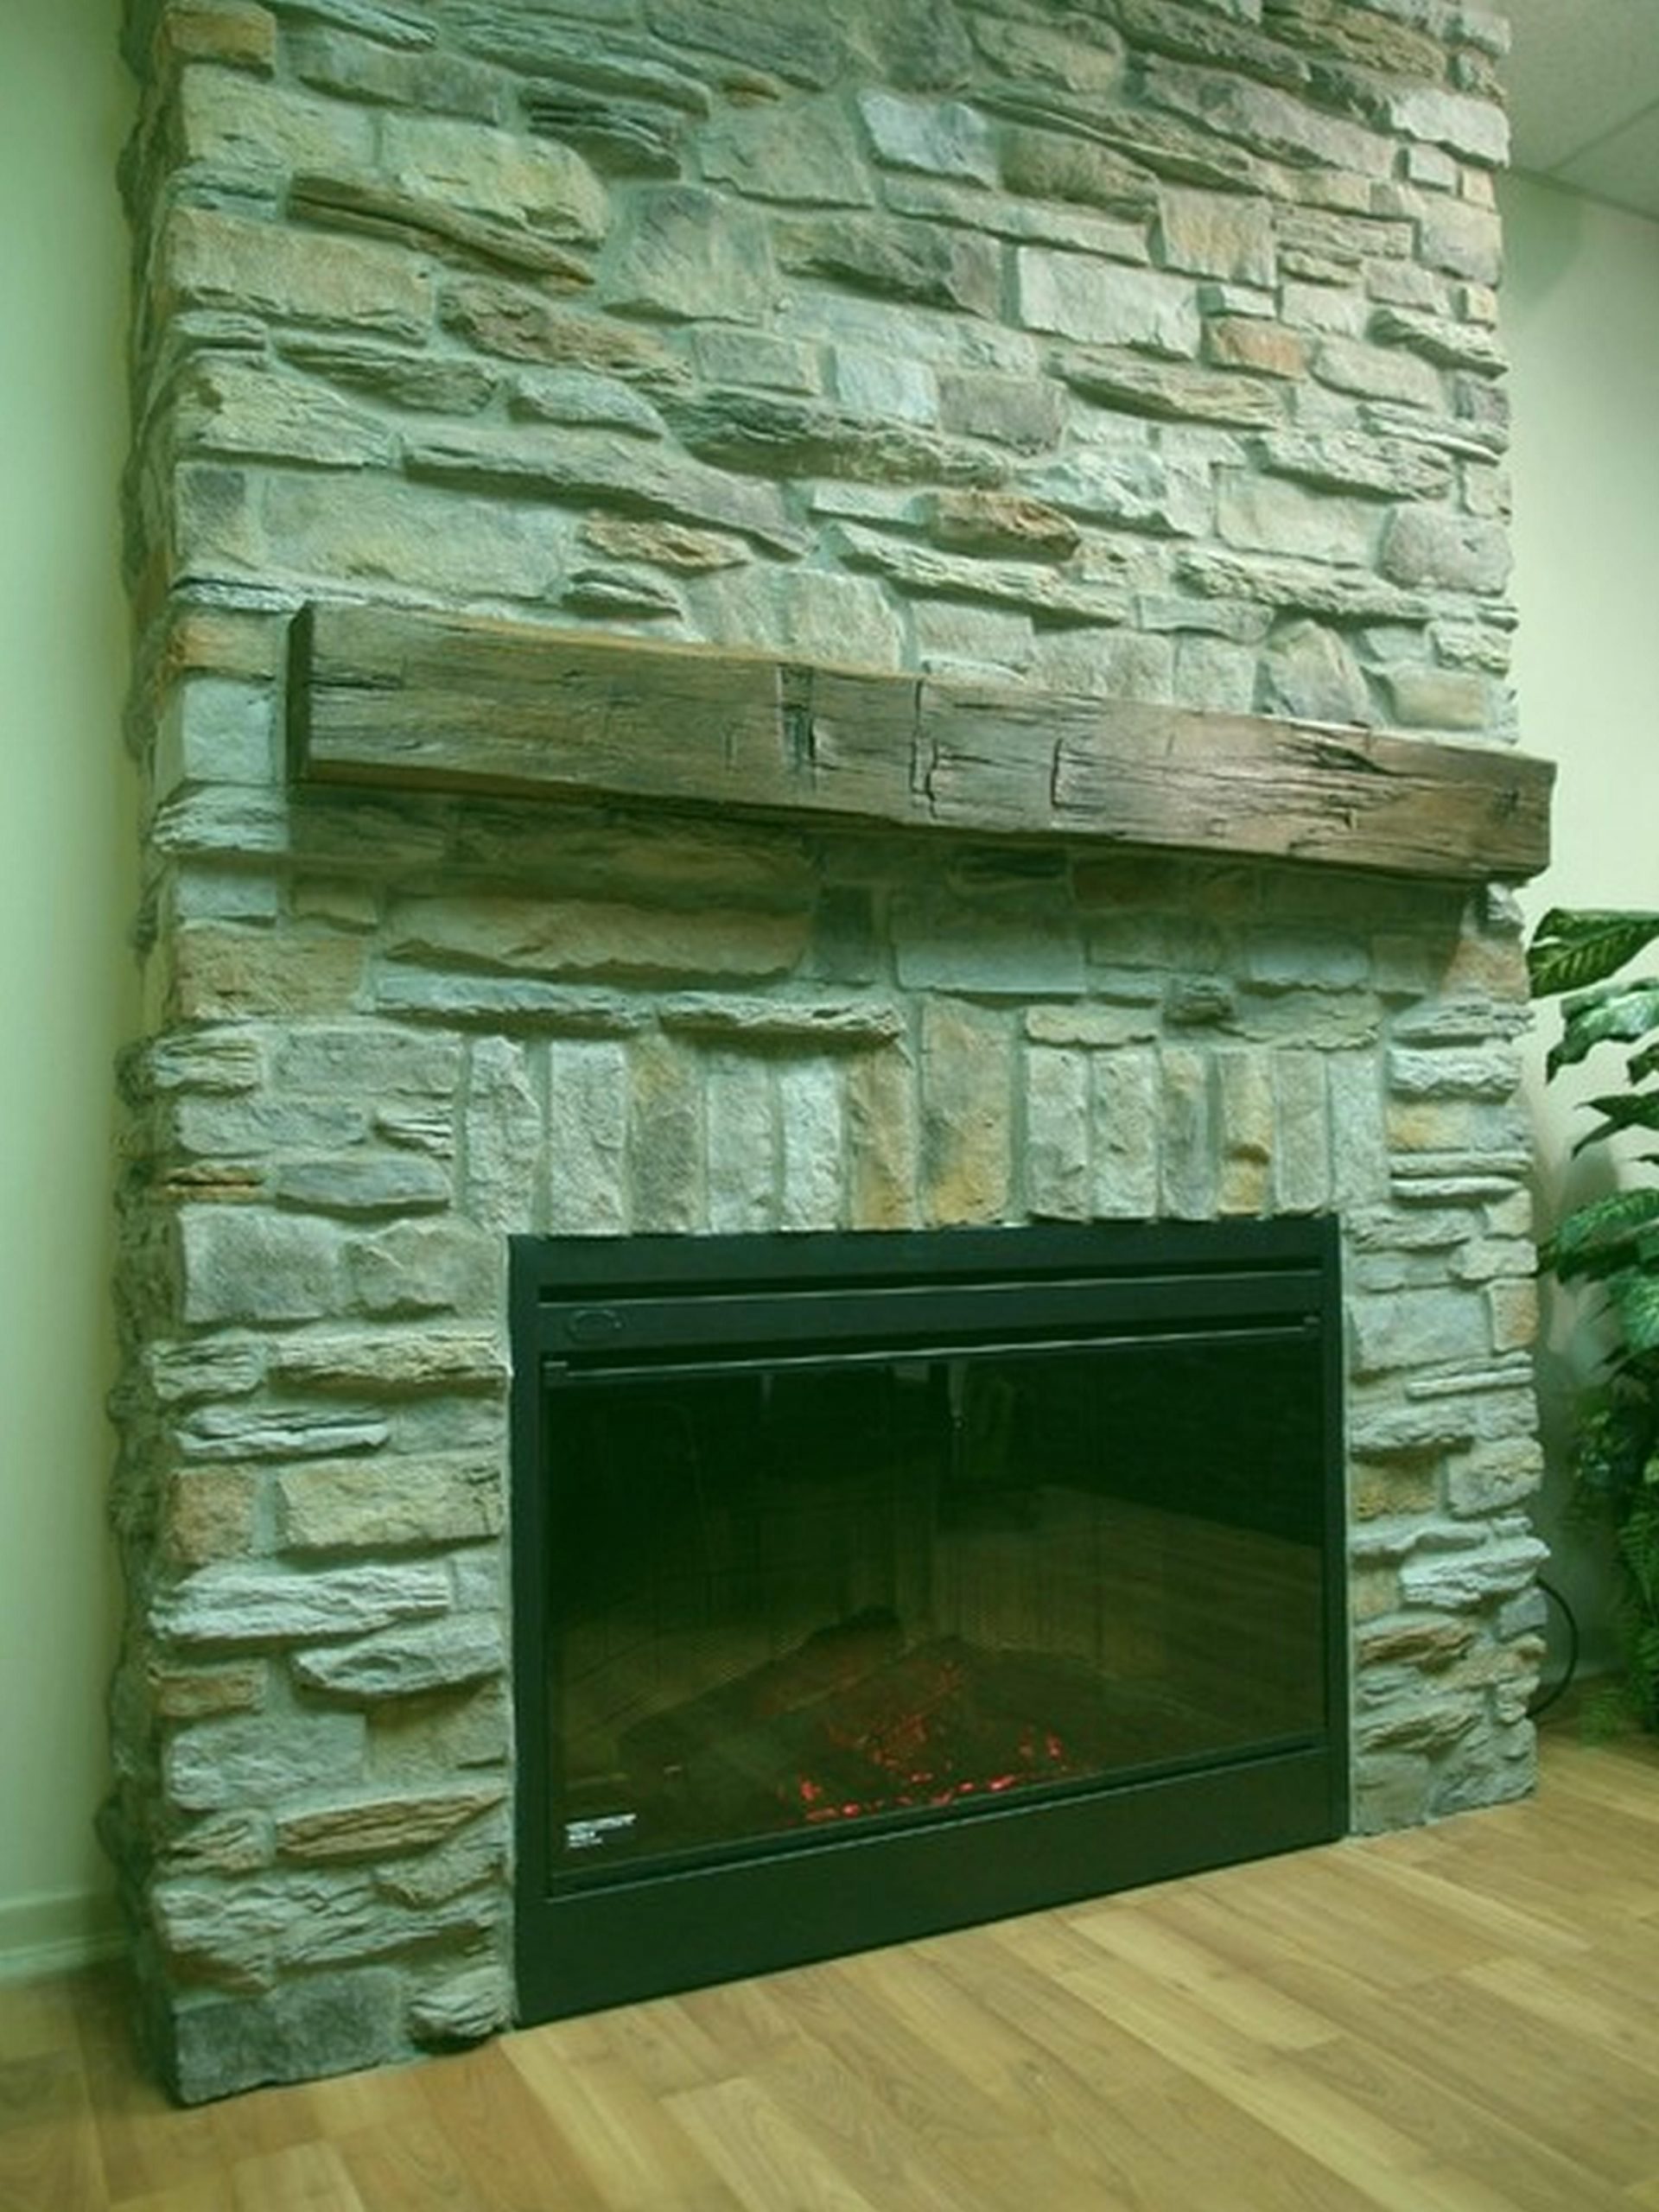 Where to Buy Fireplace Hearth Stone New Freestanding Wood Log Stove No Chimney Youtube Fireplace No